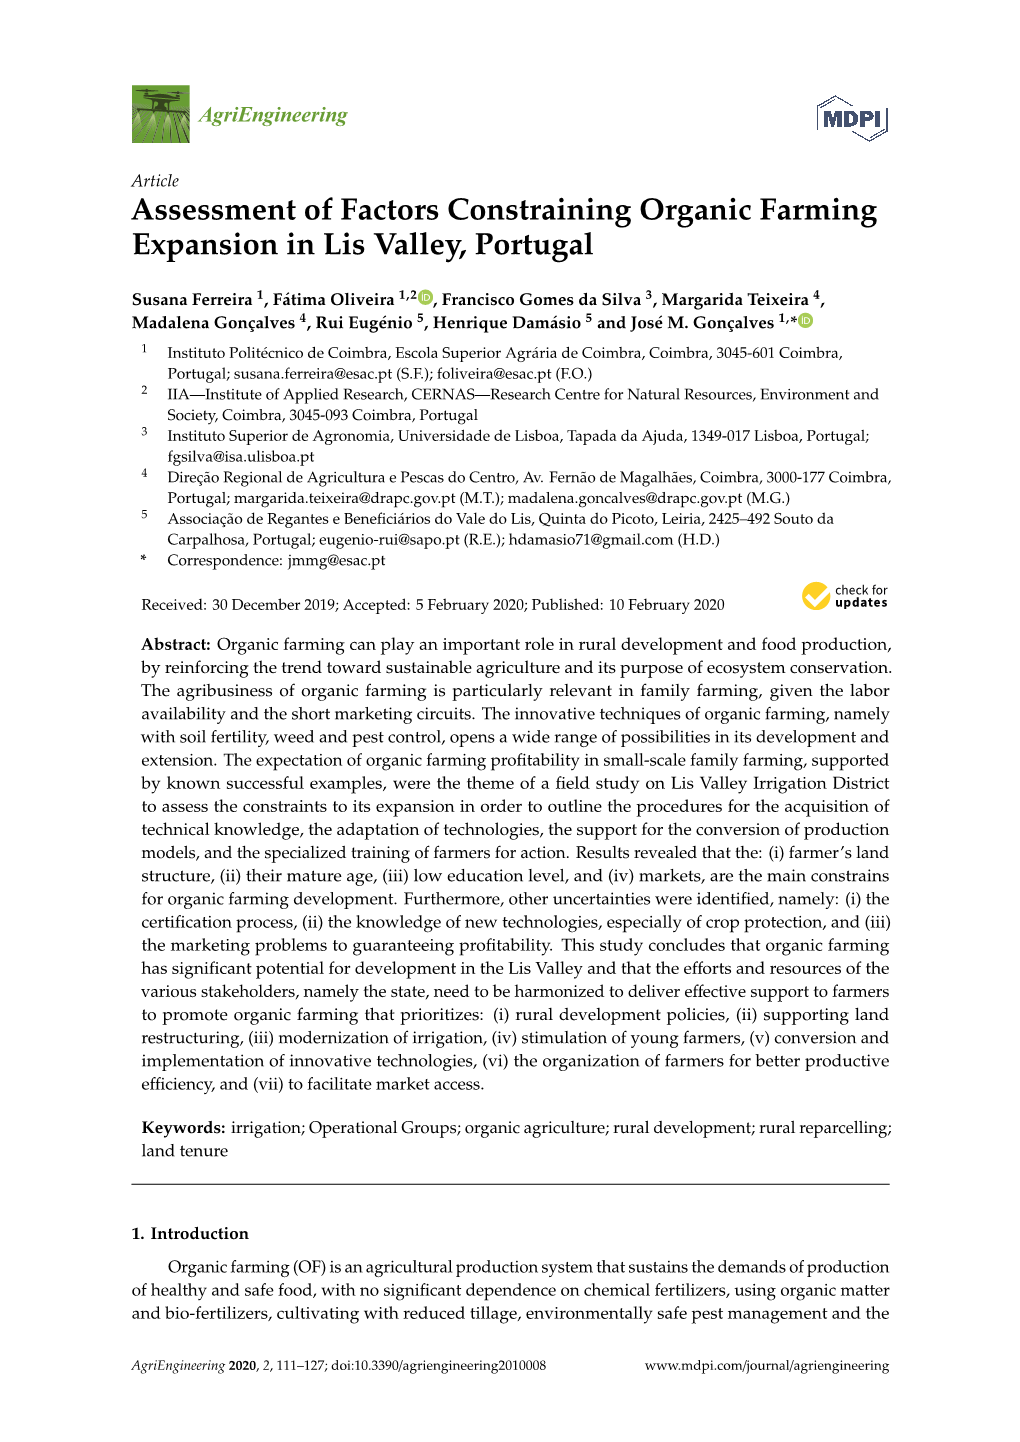 Assessment of Factors Constraining Organic Farming Expansion in Lis Valley, Portugal